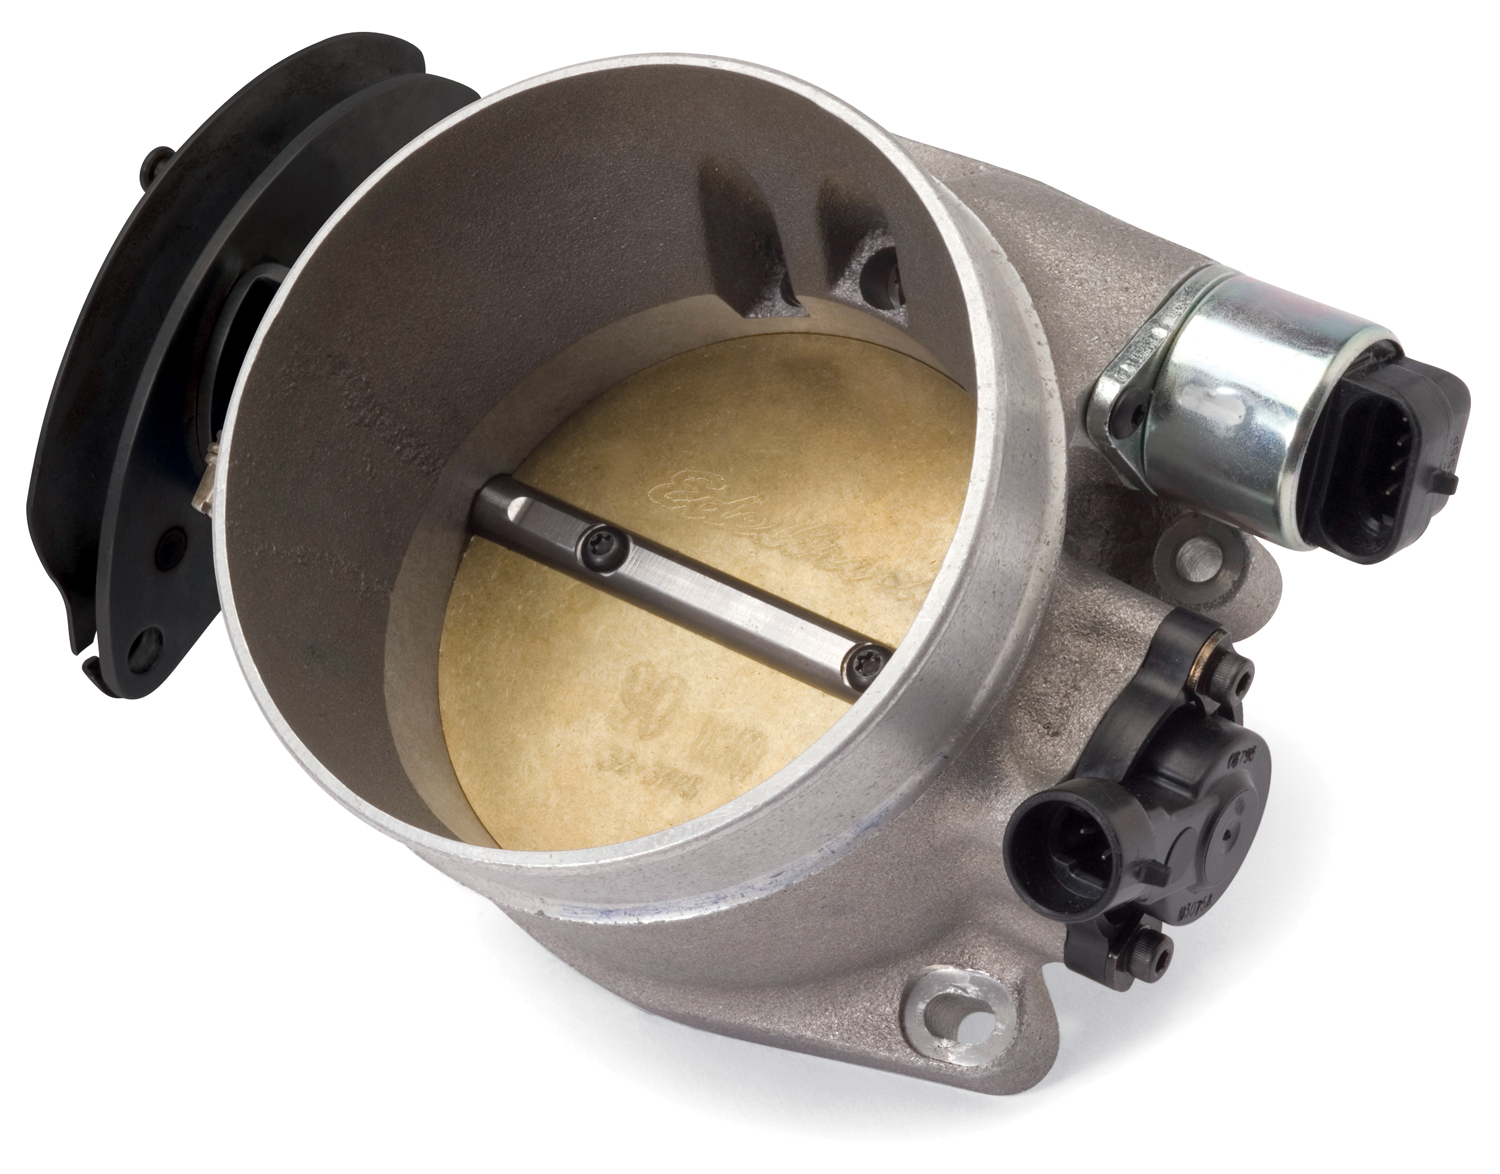 Edelbrock Throttle body, Victor Series 90mm for competition EFI, as-cast finish, Part# 3869